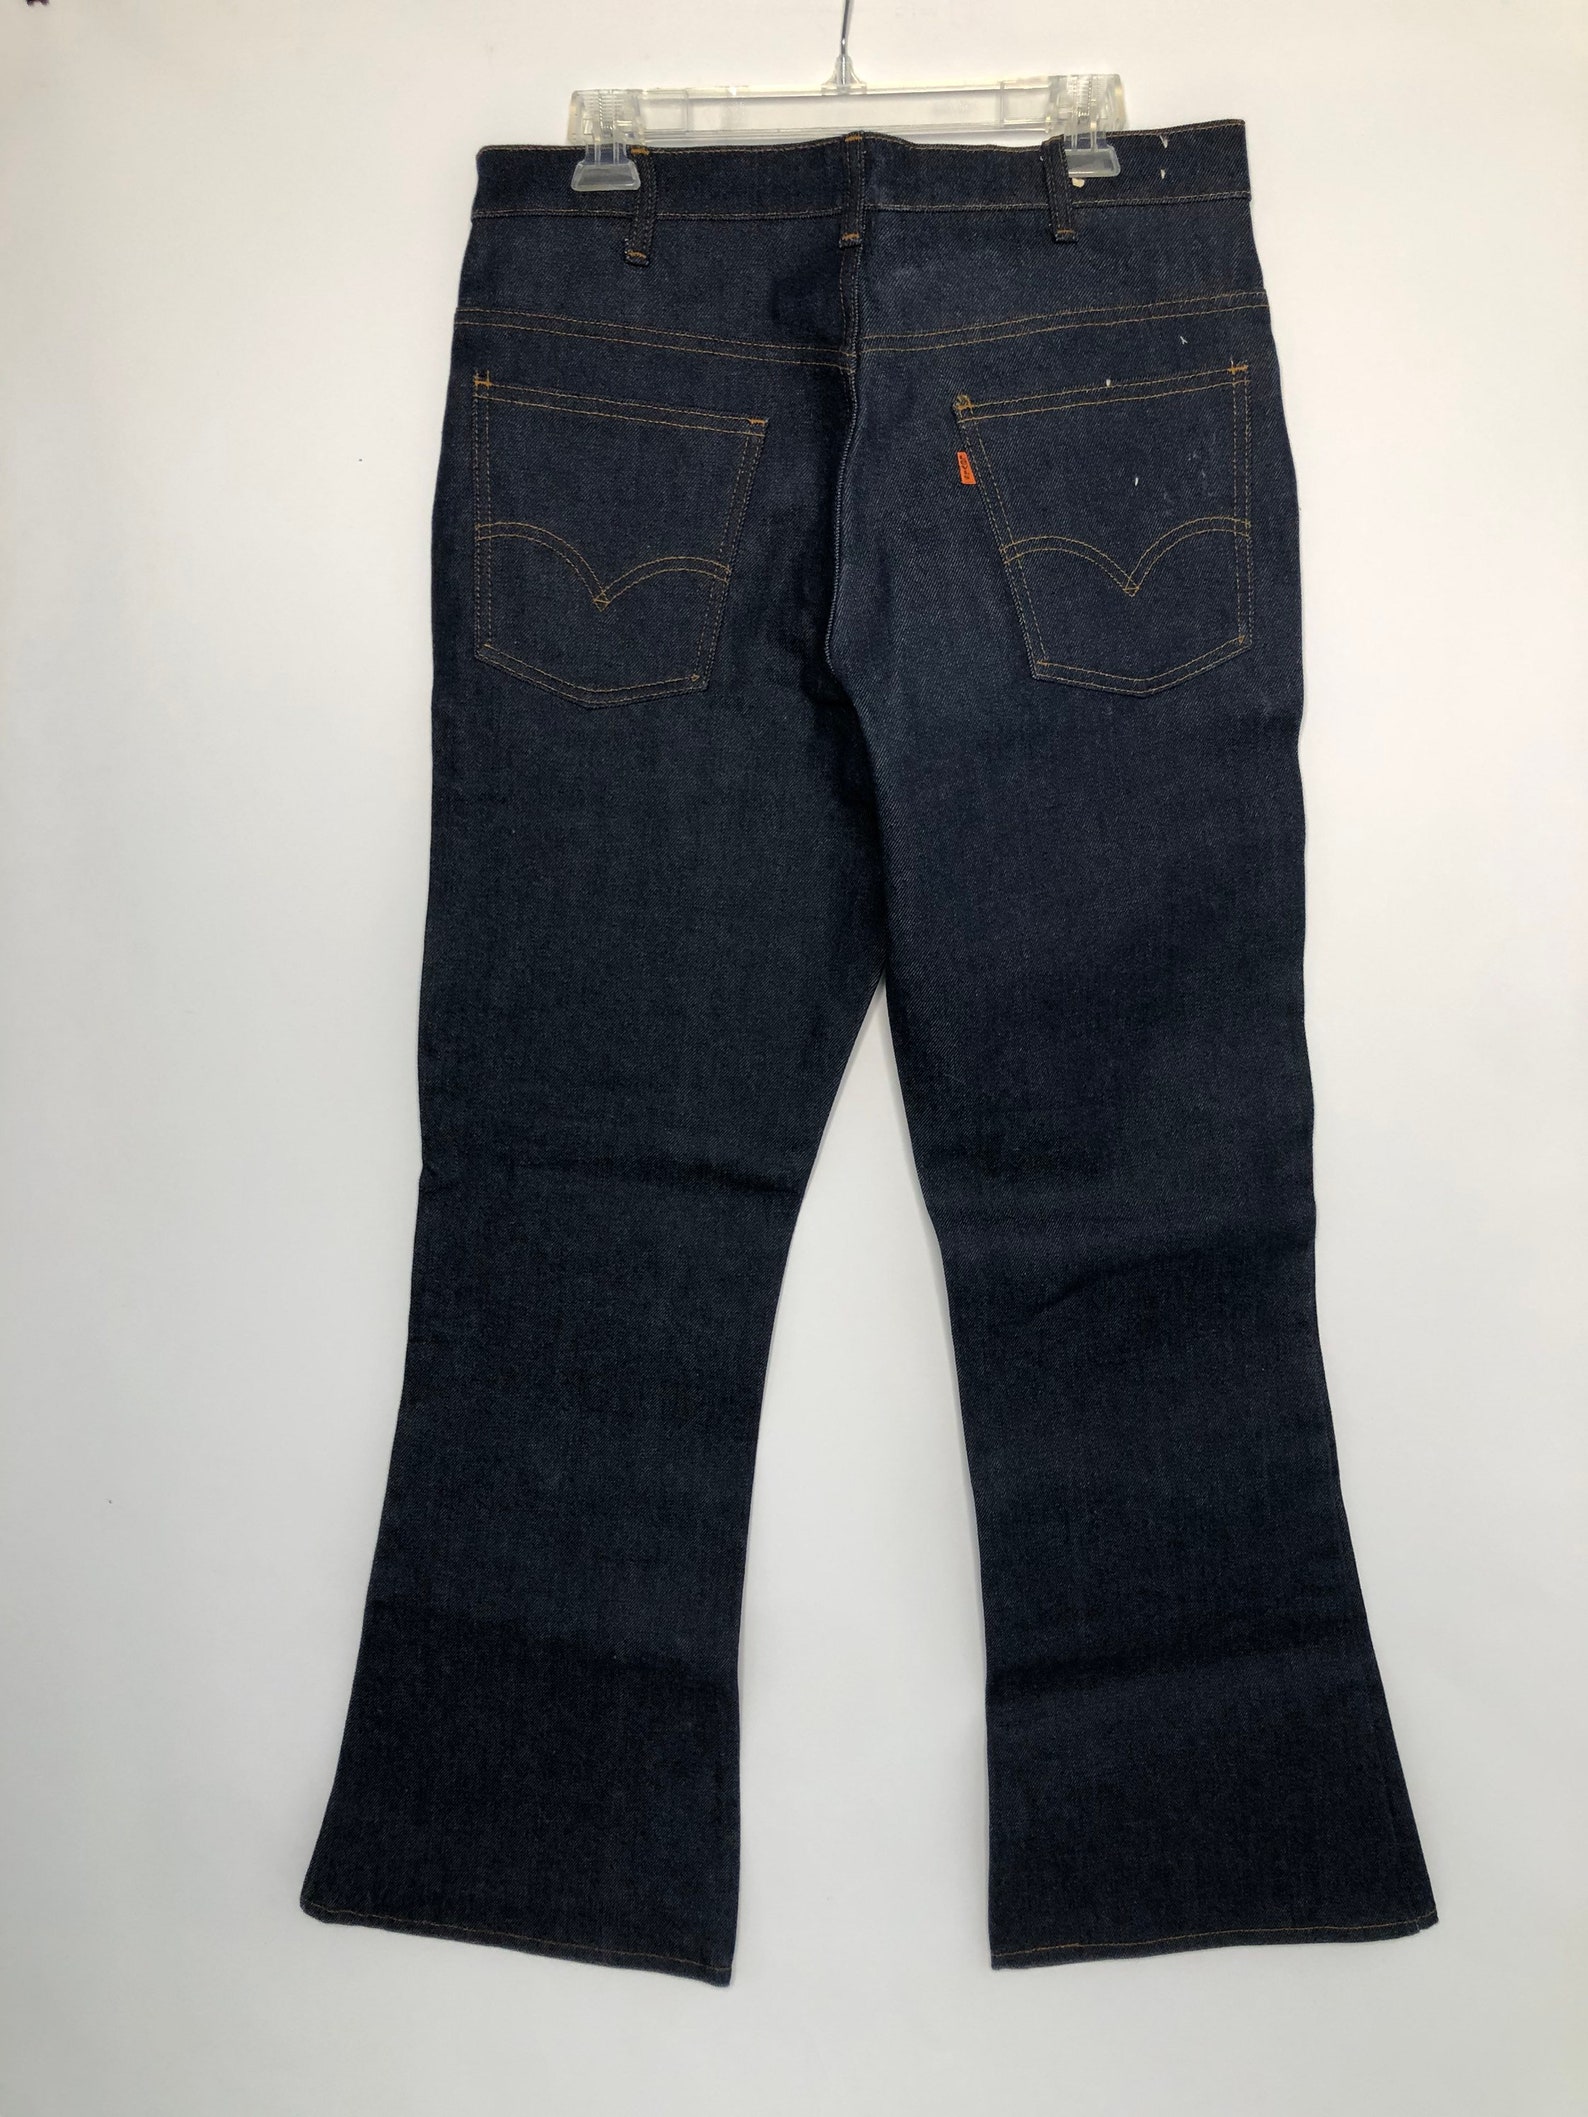 Vintage 70s Levis SF 207 646 Jeans Bell Bottoms New Old - Etsy